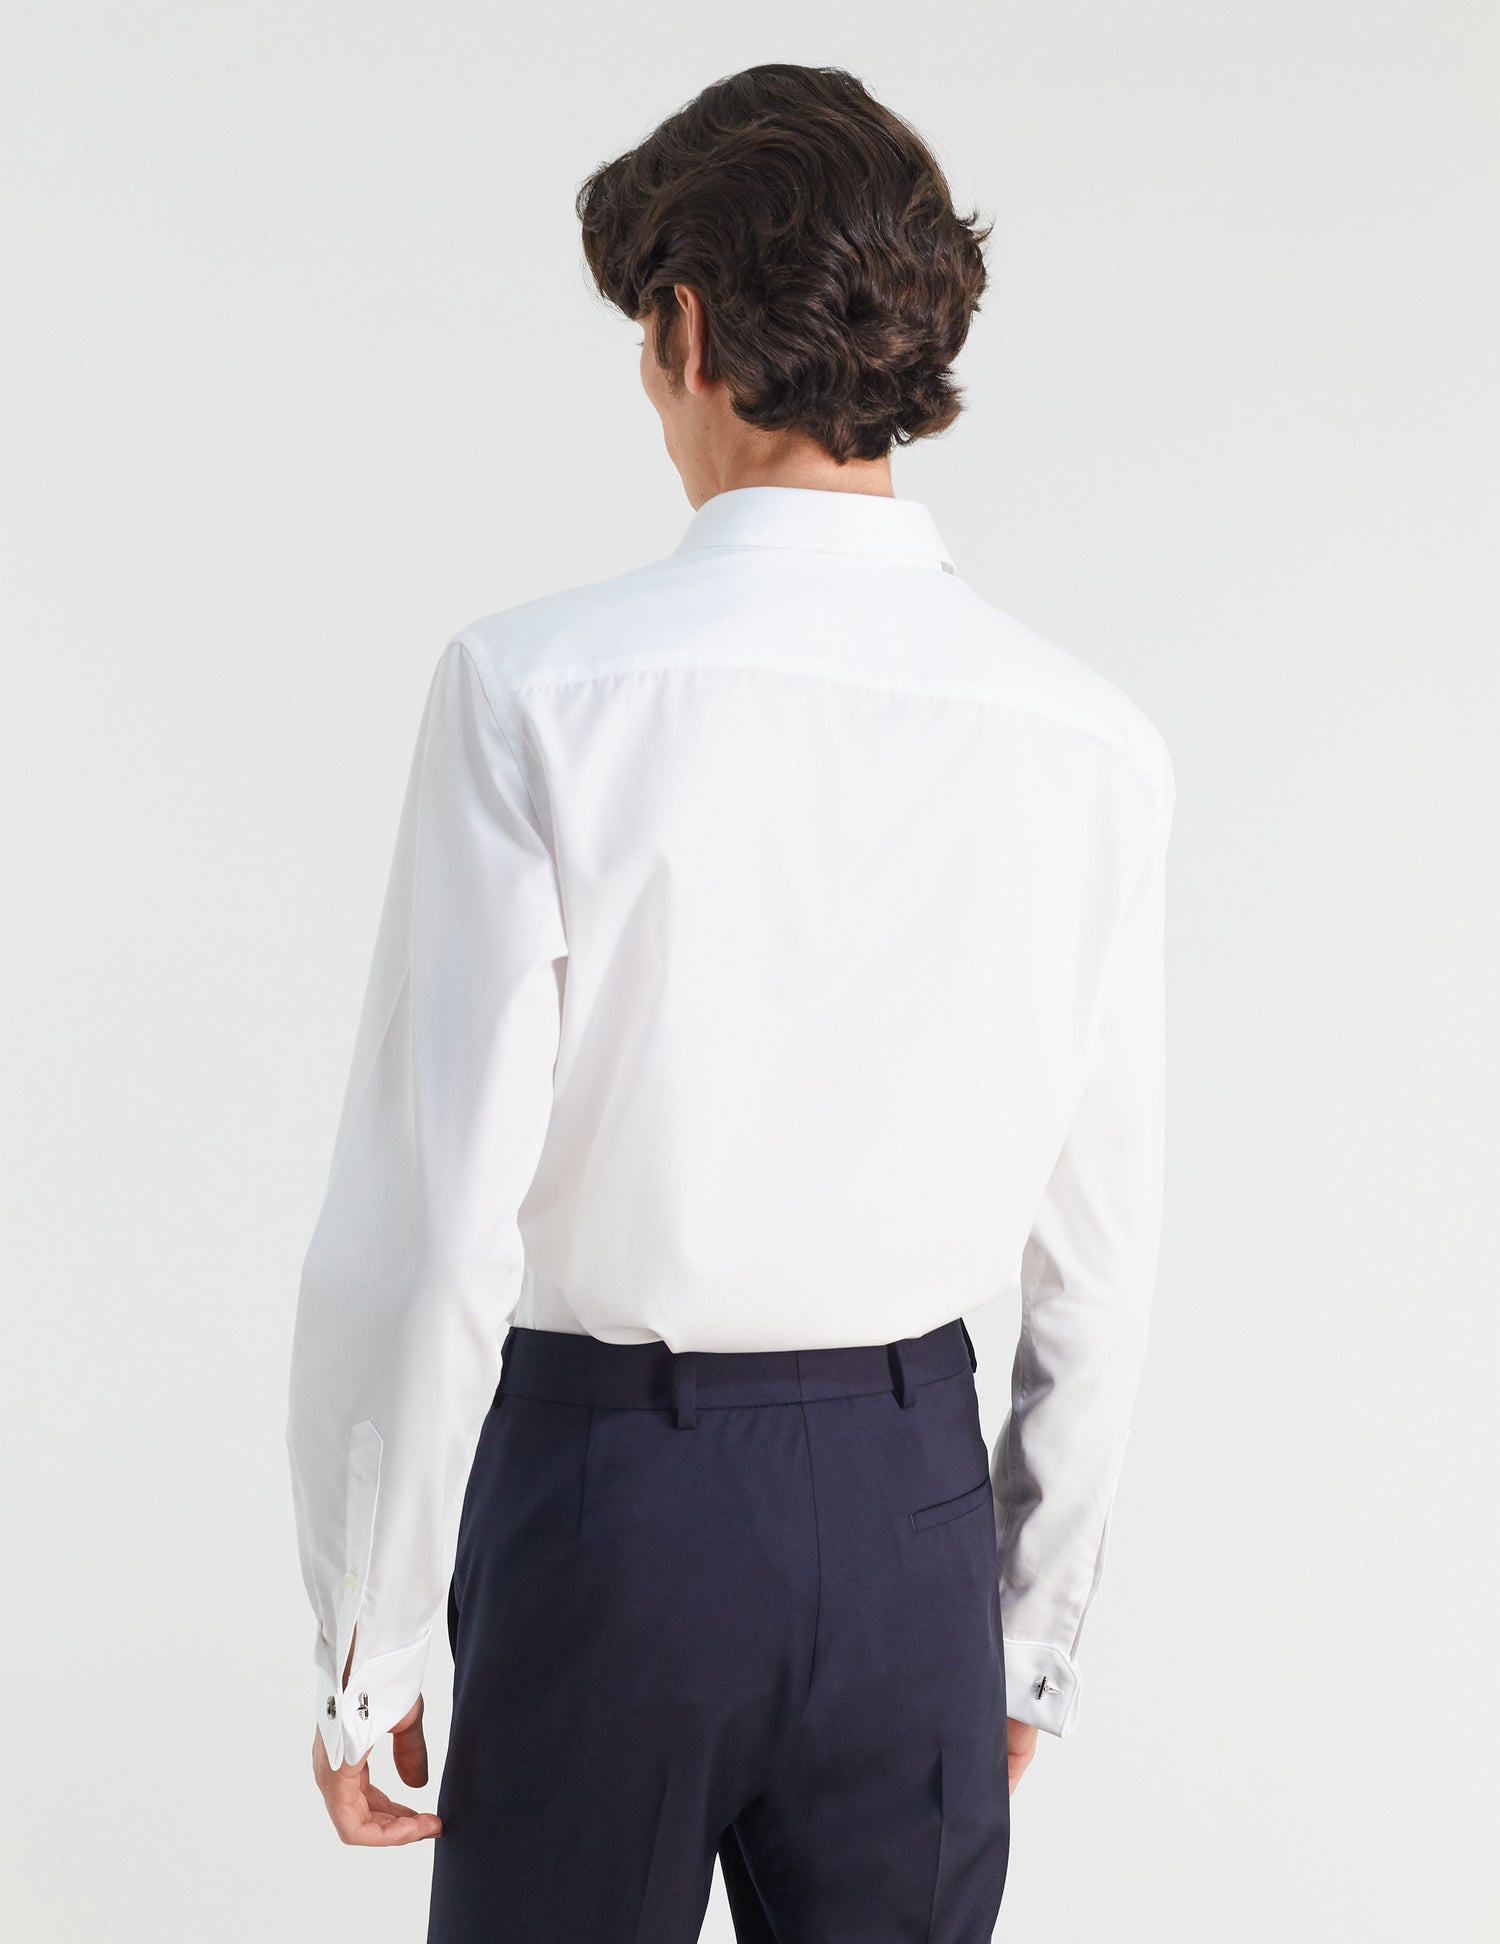 Fitted white shirt - Poplin - Figaret Collar - French Cuffs#4